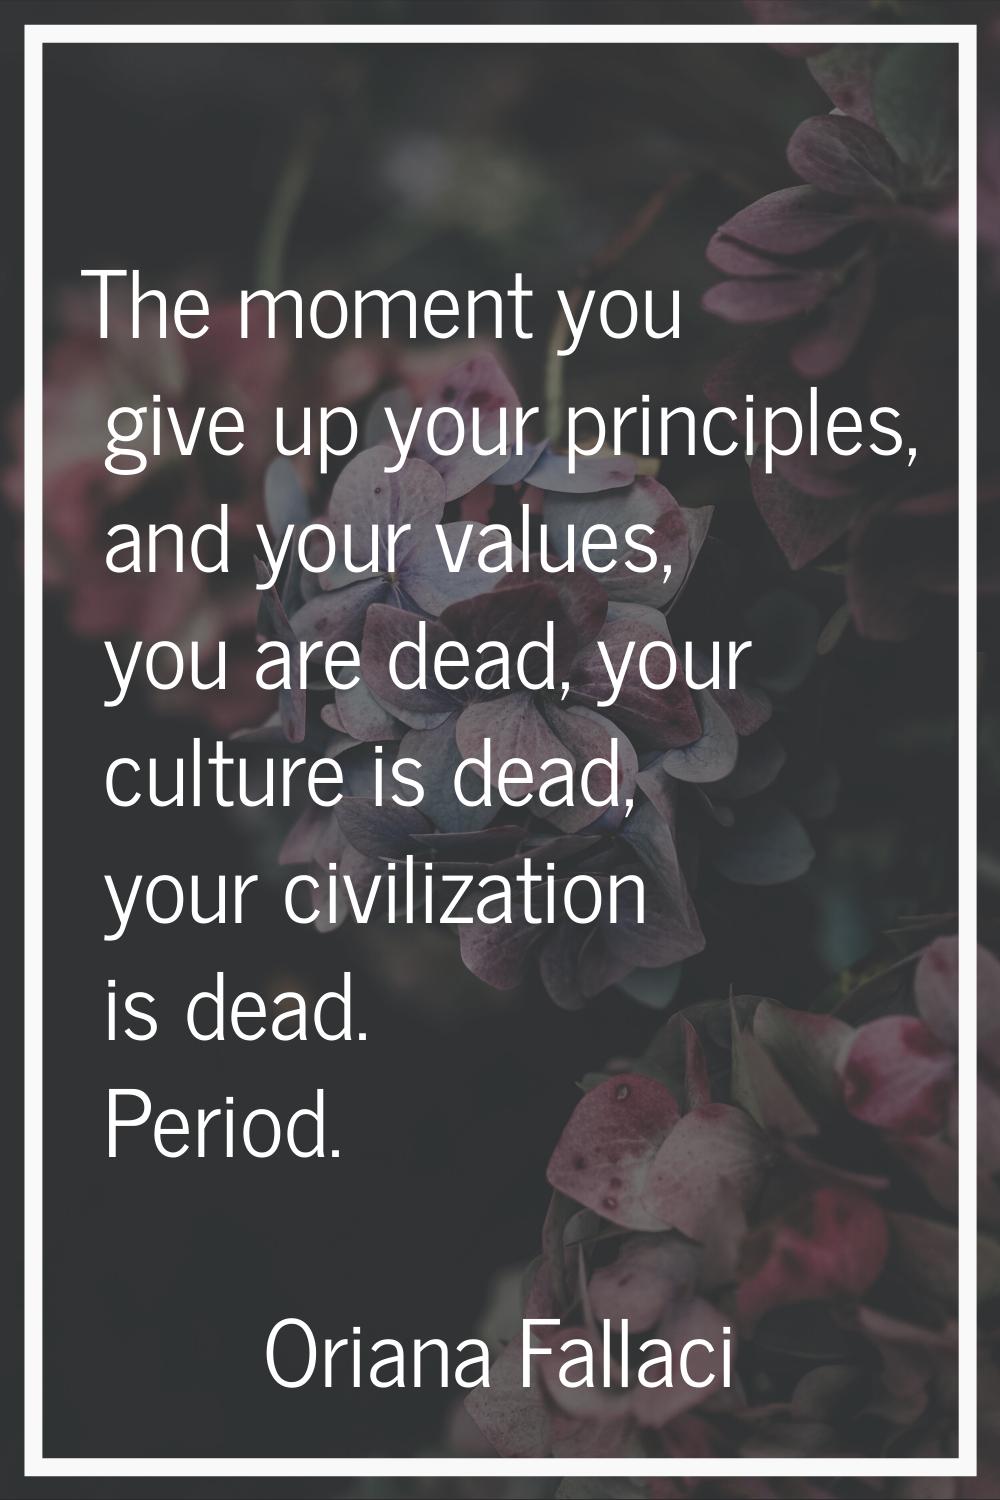 The moment you give up your principles, and your values, you are dead, your culture is dead, your c